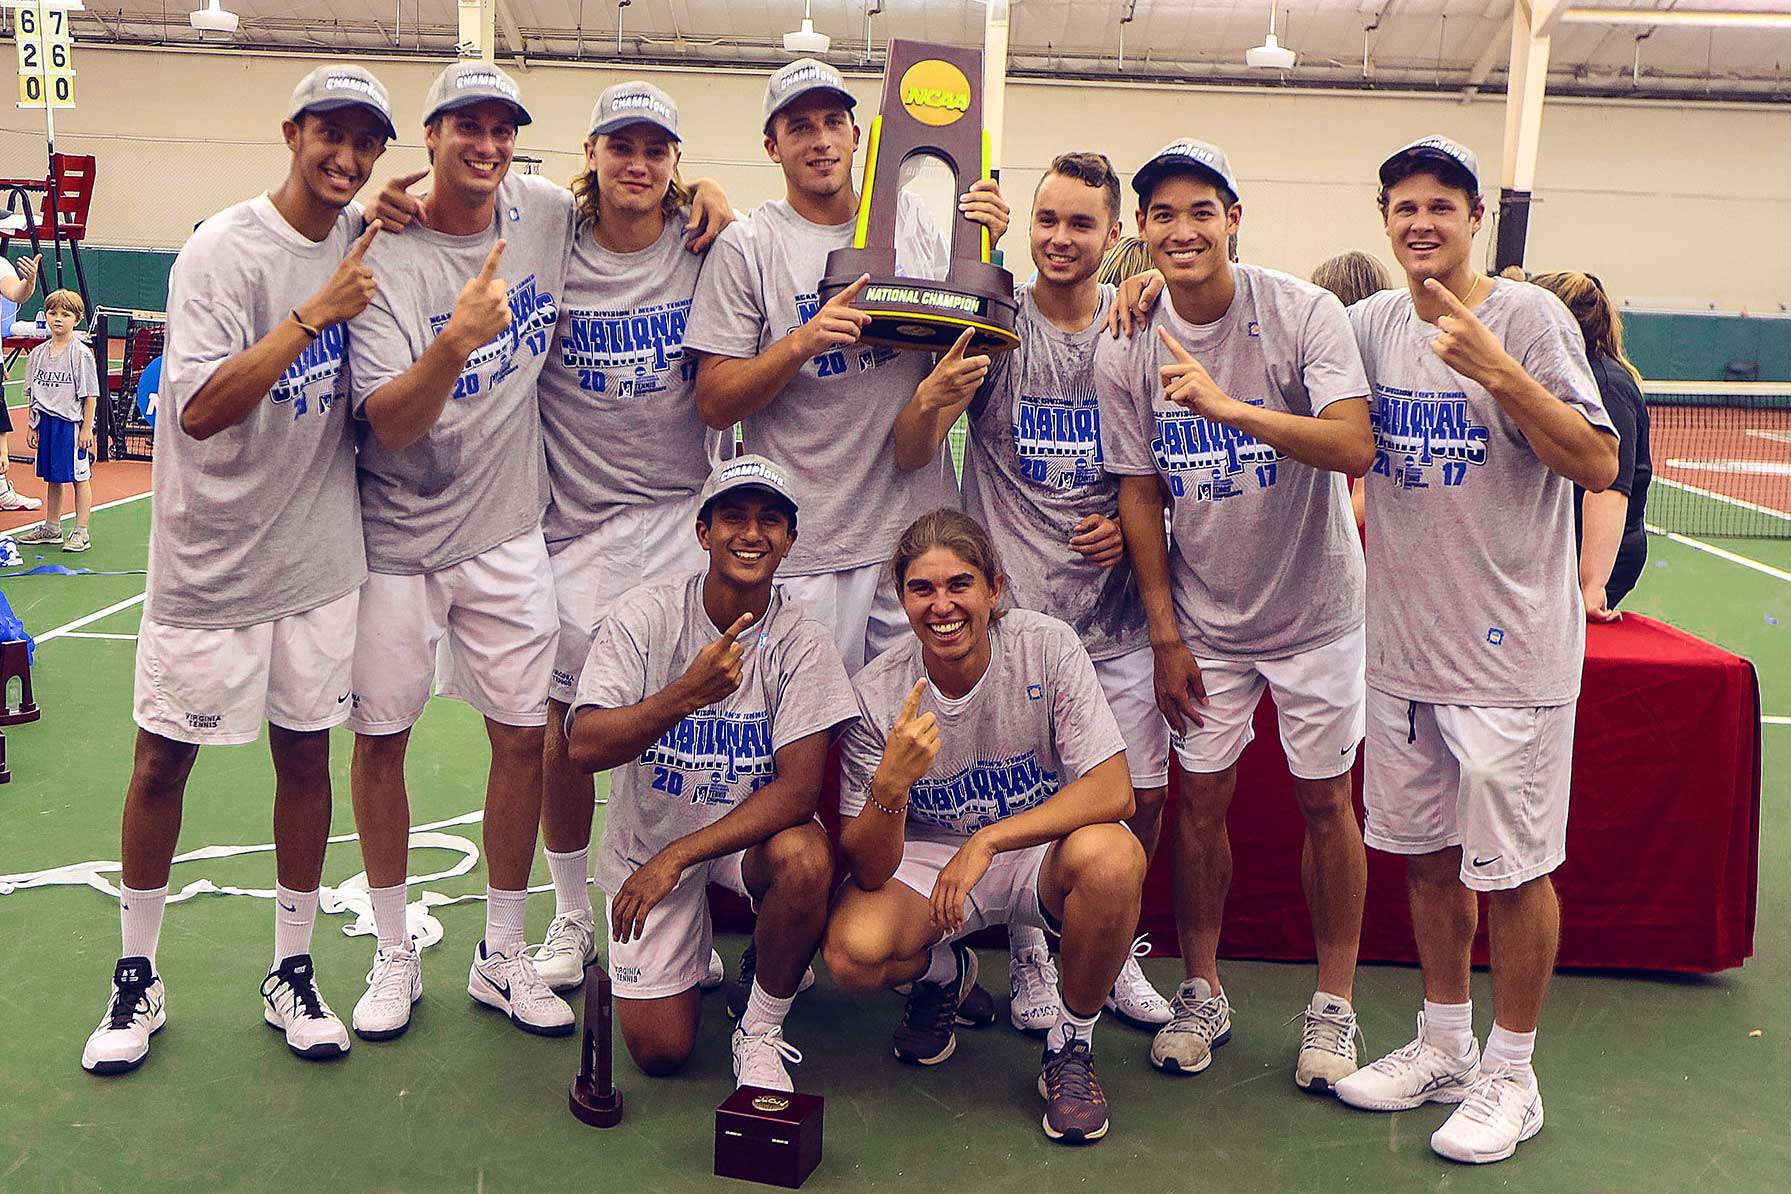 The Cavalier men’s tennis team’s third straight national title catapulted UVA to No. 19 in the all-sports rankings. (UVA Athletics photo)